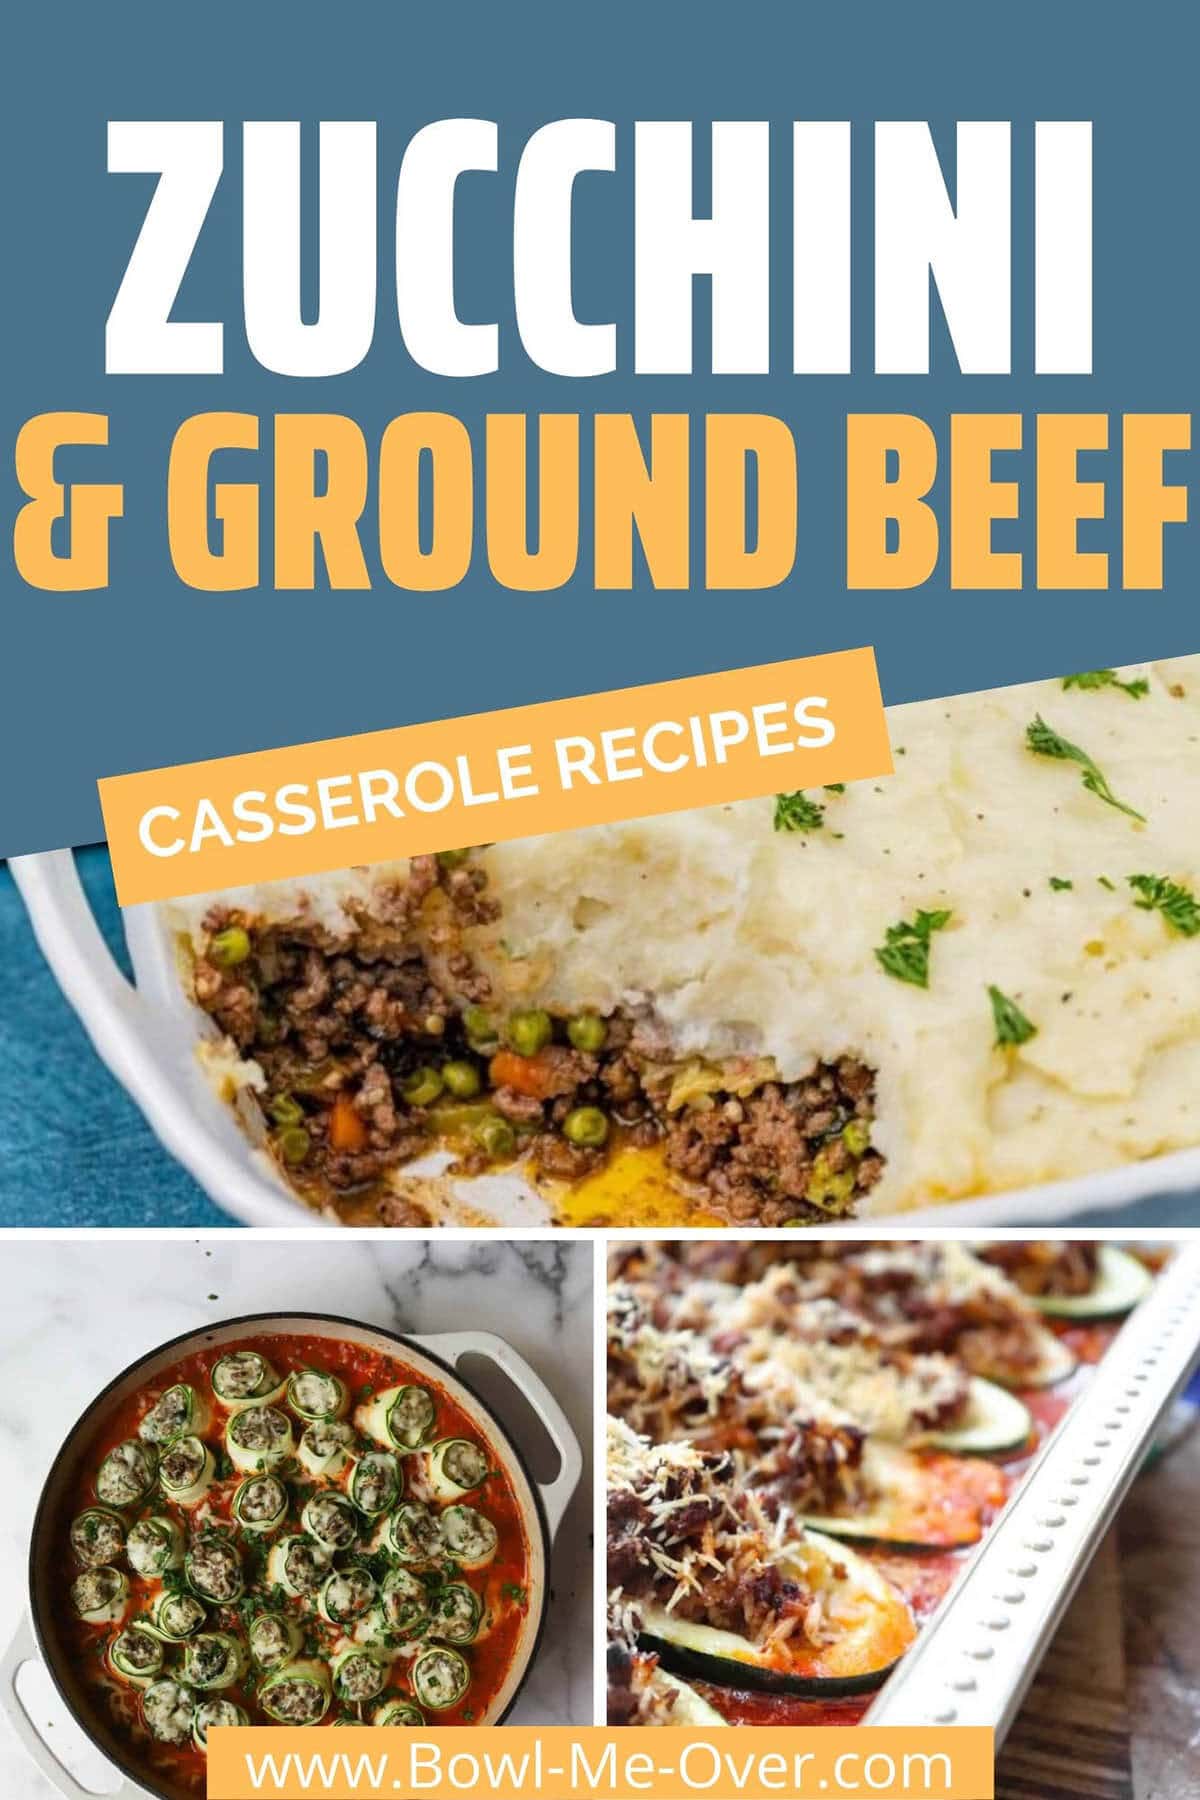 Collage of photos of Ground Beef and Zucchini Casserole Recipes with print overlay for Pinterest.